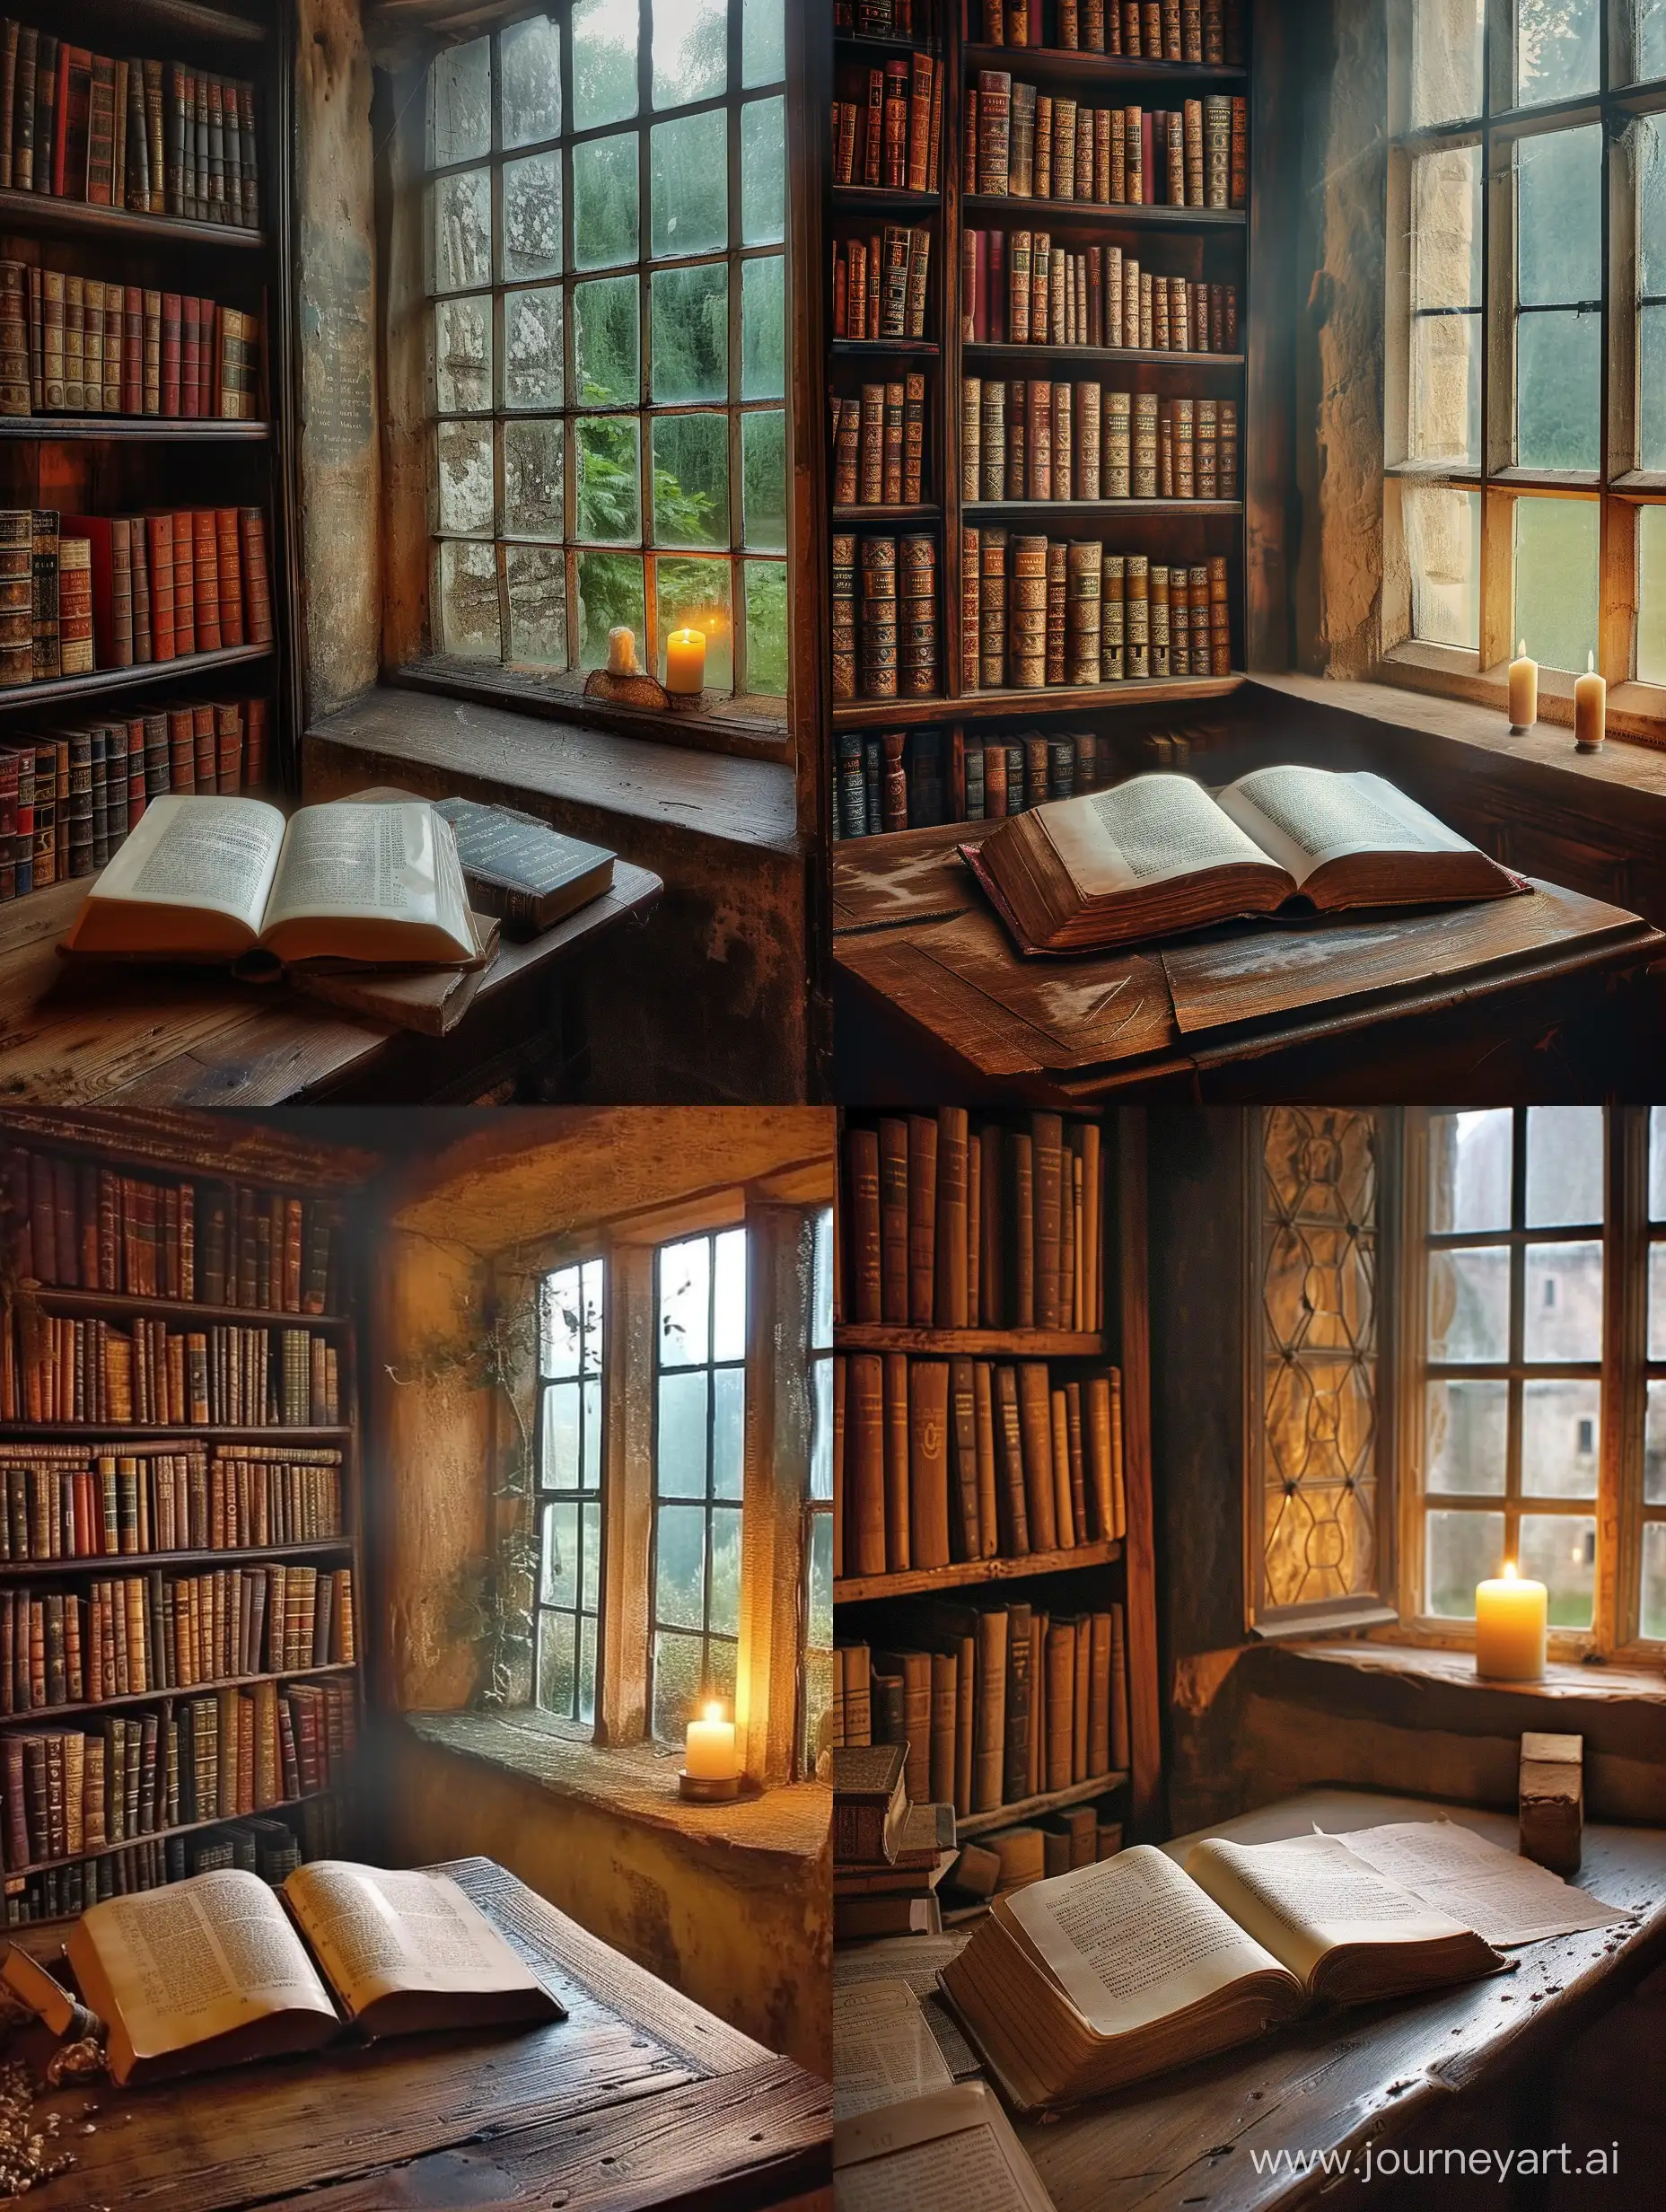 a very dreamlike image. an old and open English book on a table in a very beautiful and nearly poor room with a lightfull window with candle on the window and a library full of books. i want just one photo. very very too clear photo not fuzzy. window on the right of the image. a very dreamy room.